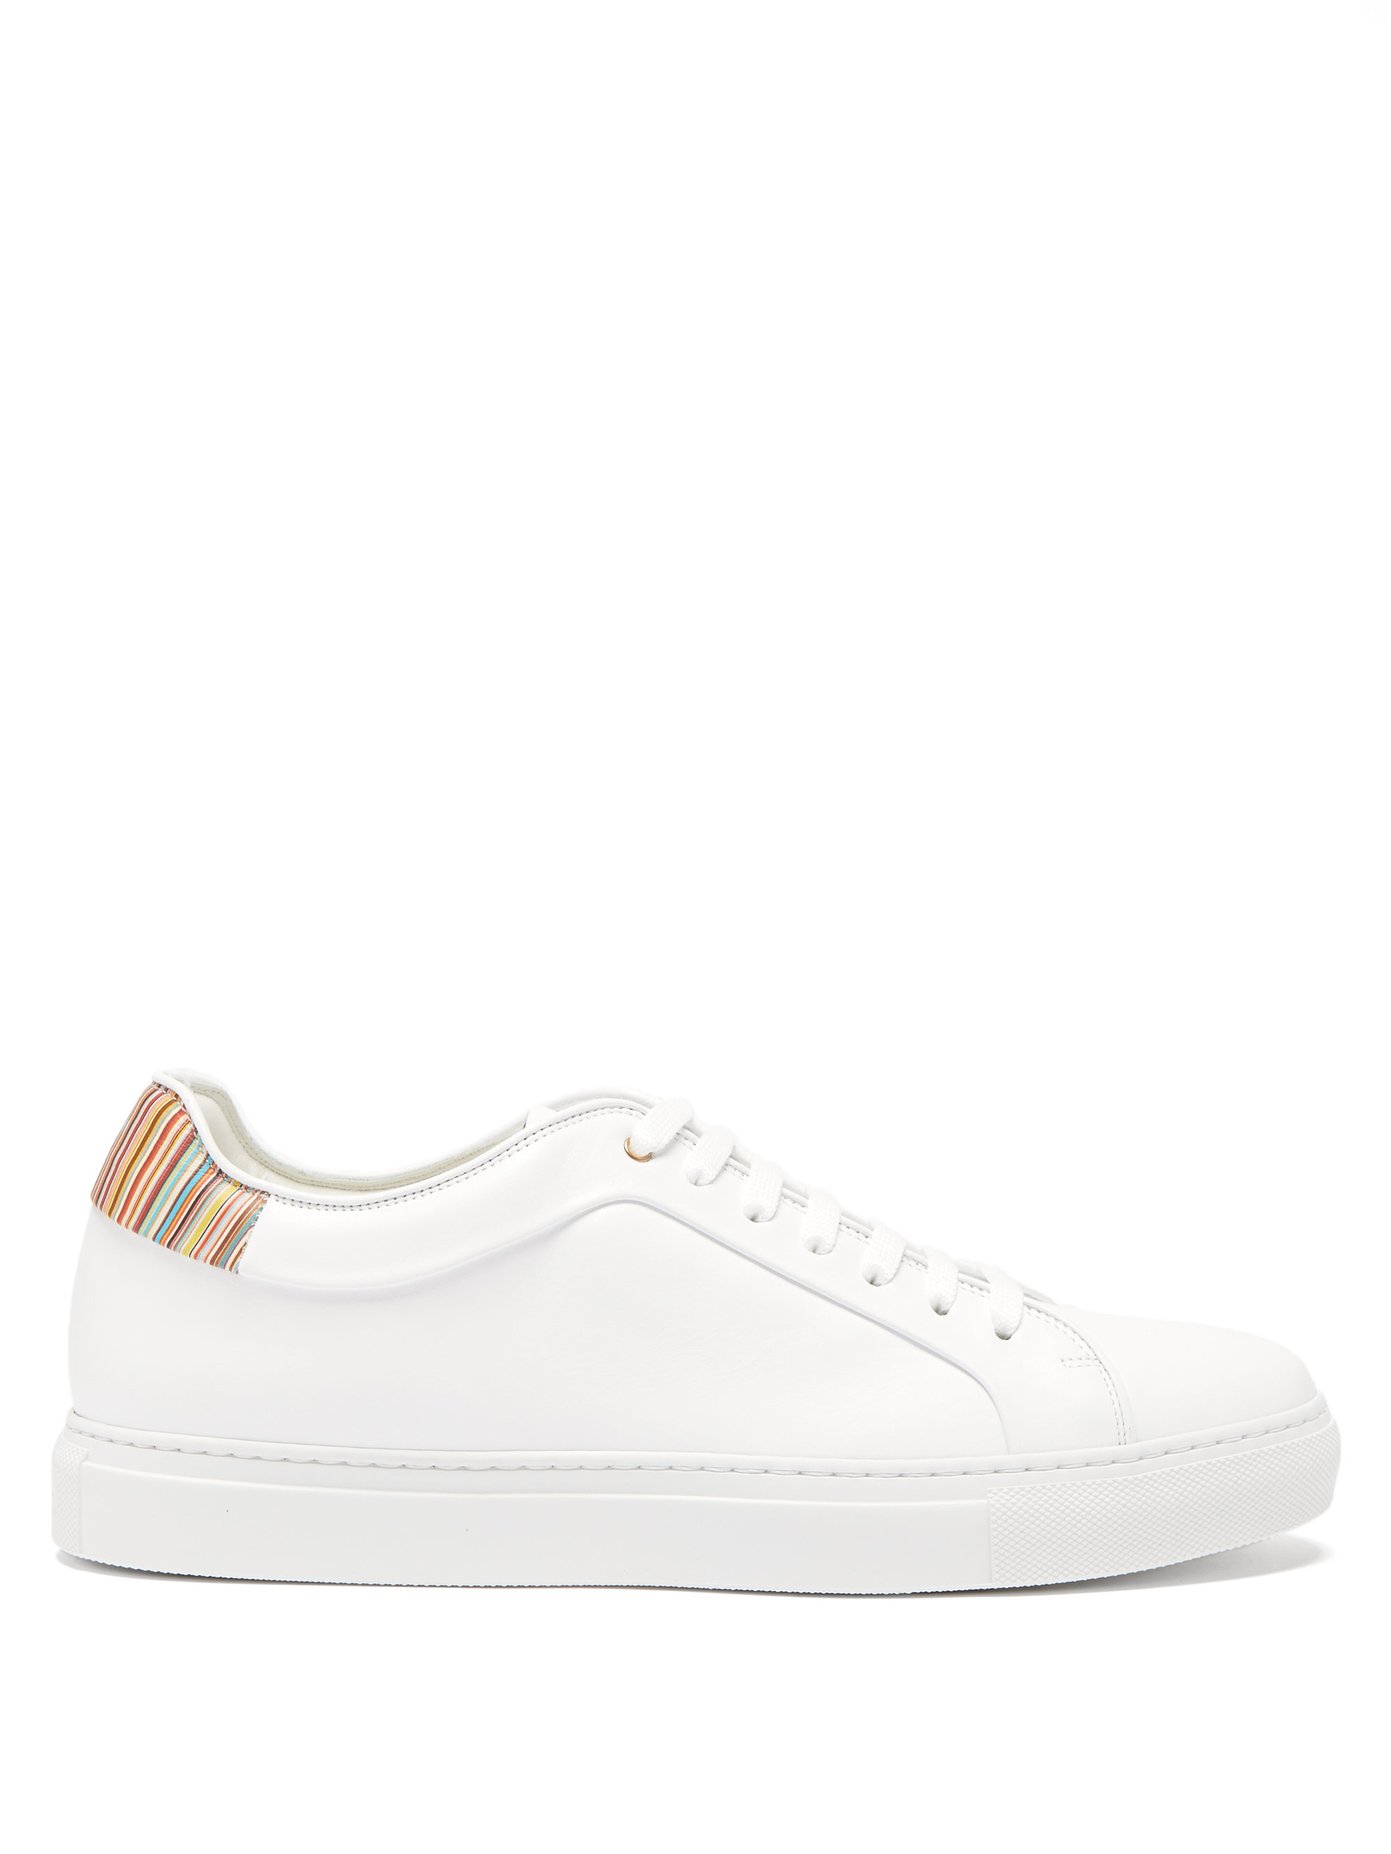 PAUL SMITH Basso Quiet White Trainer Sneaker Shoes MSRP $595 Size US 12 UK 11 